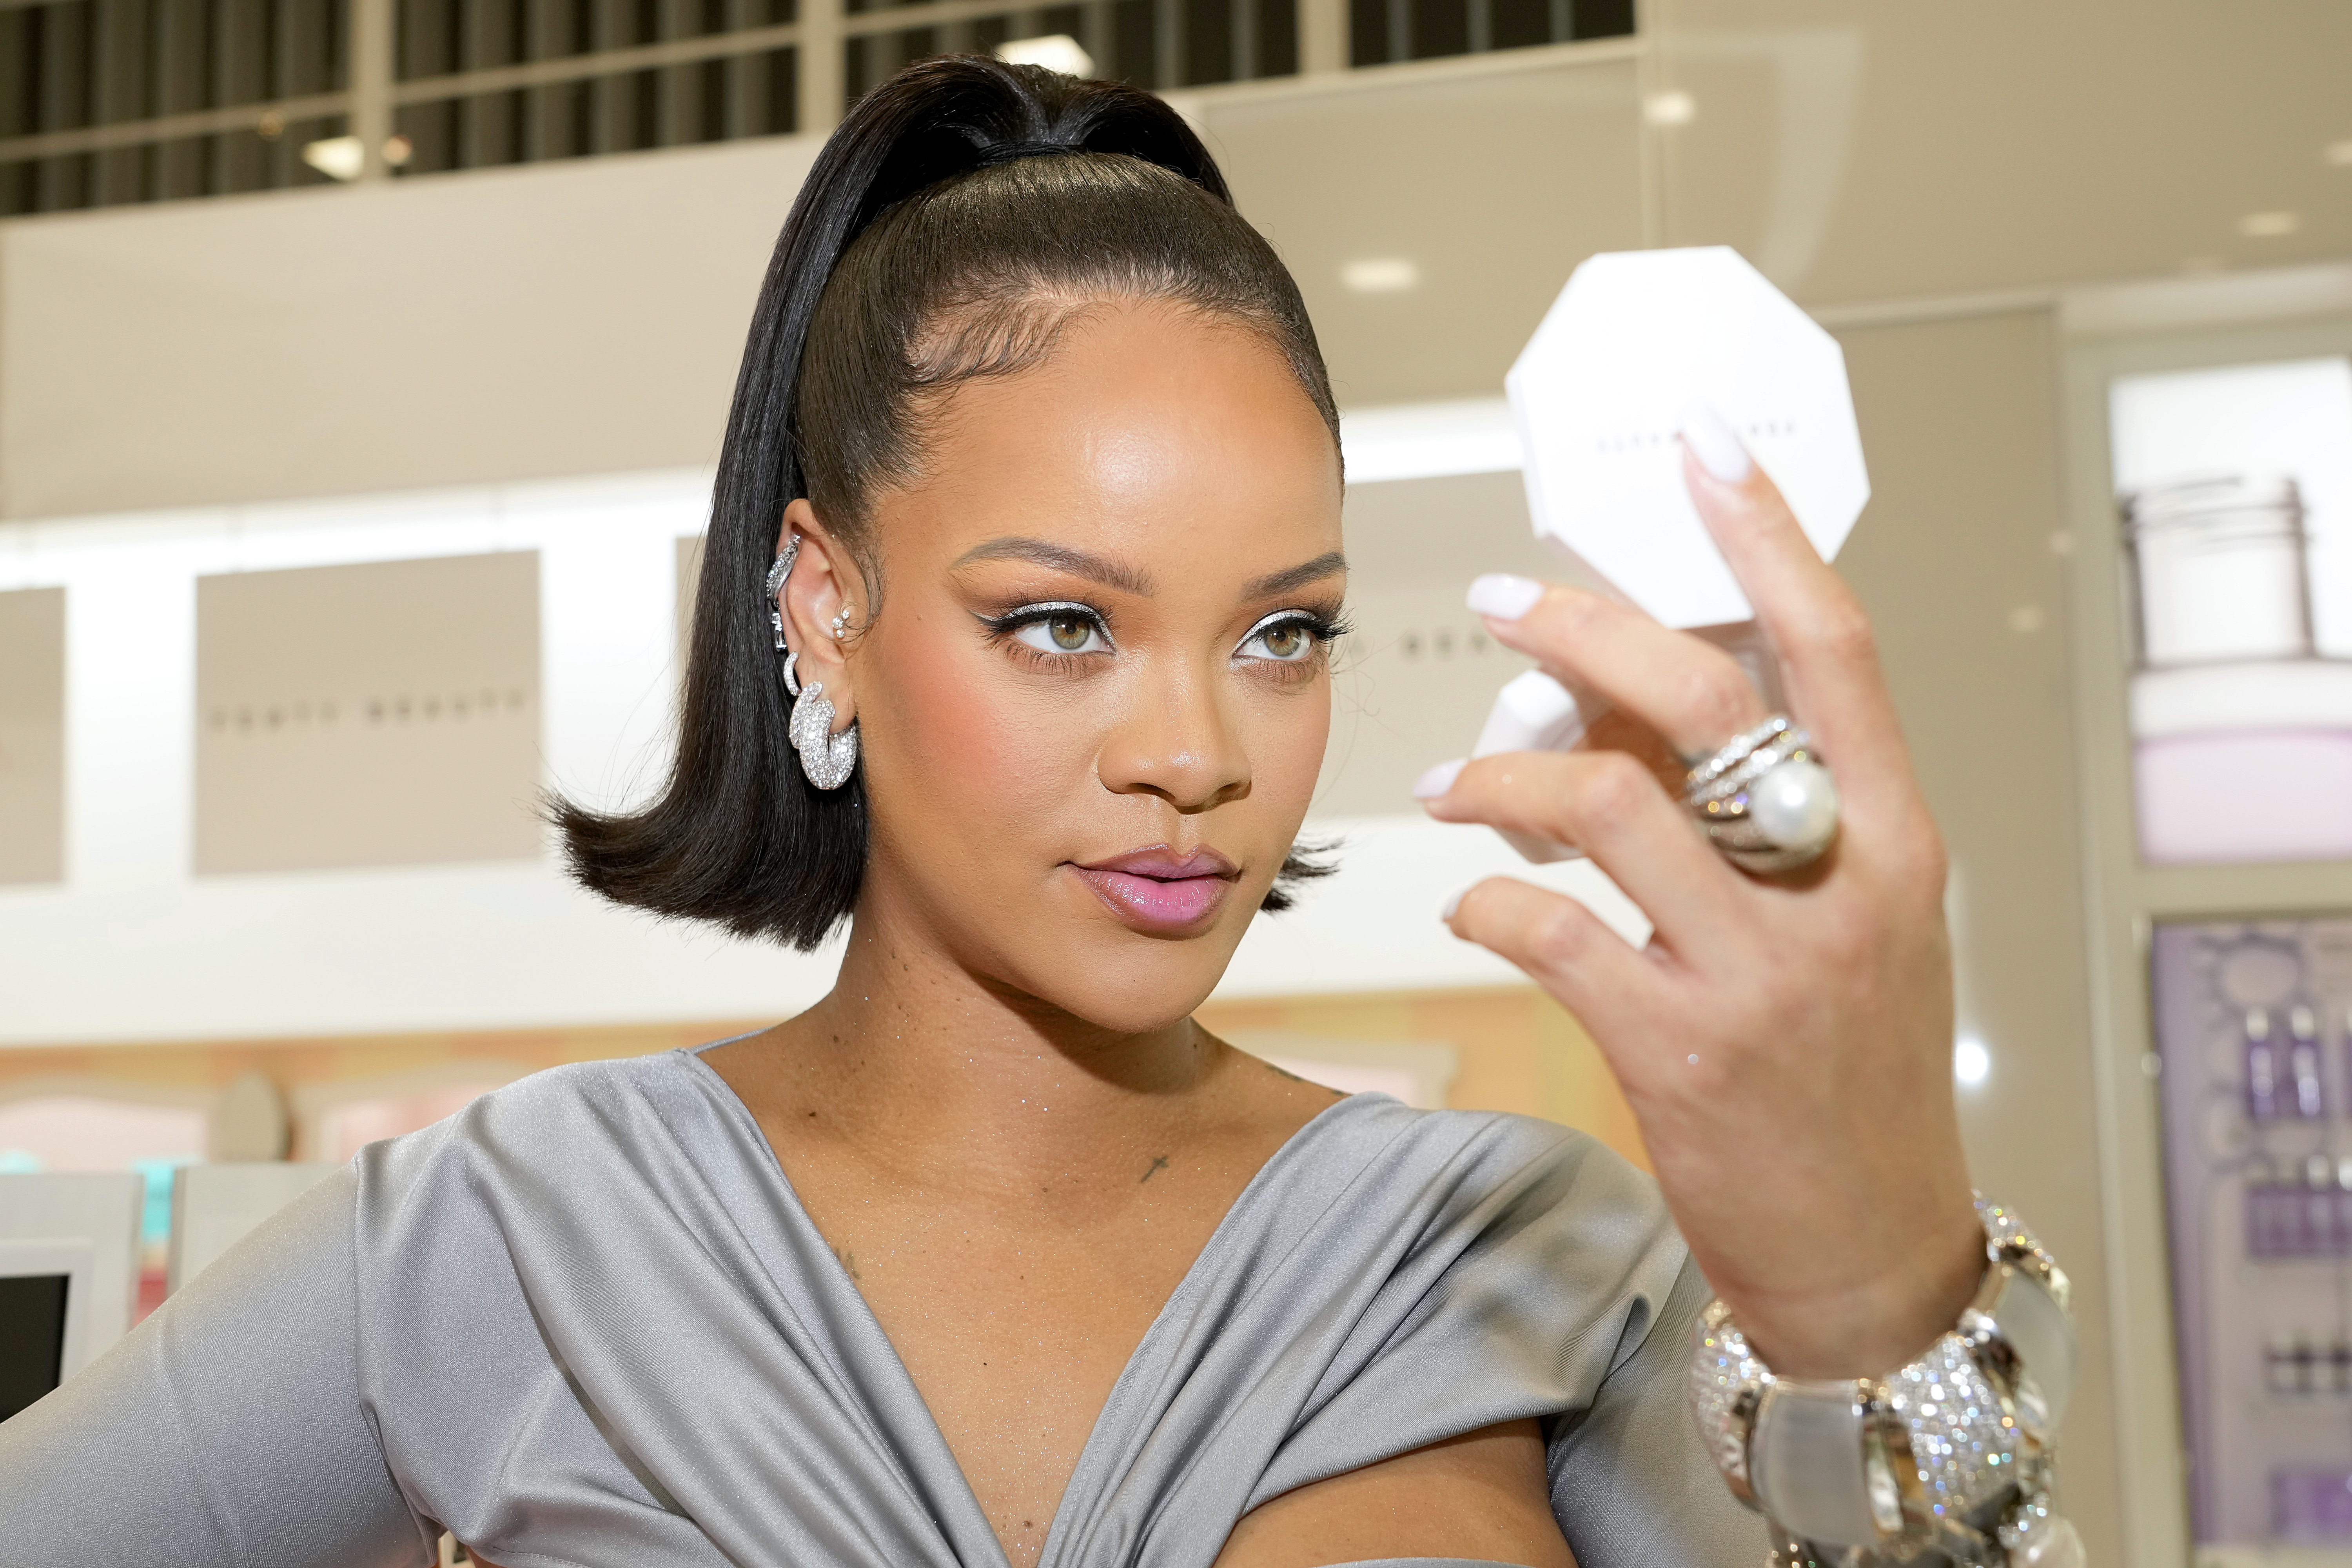 Fenty Beauty launches limited edition product for Rihanna's